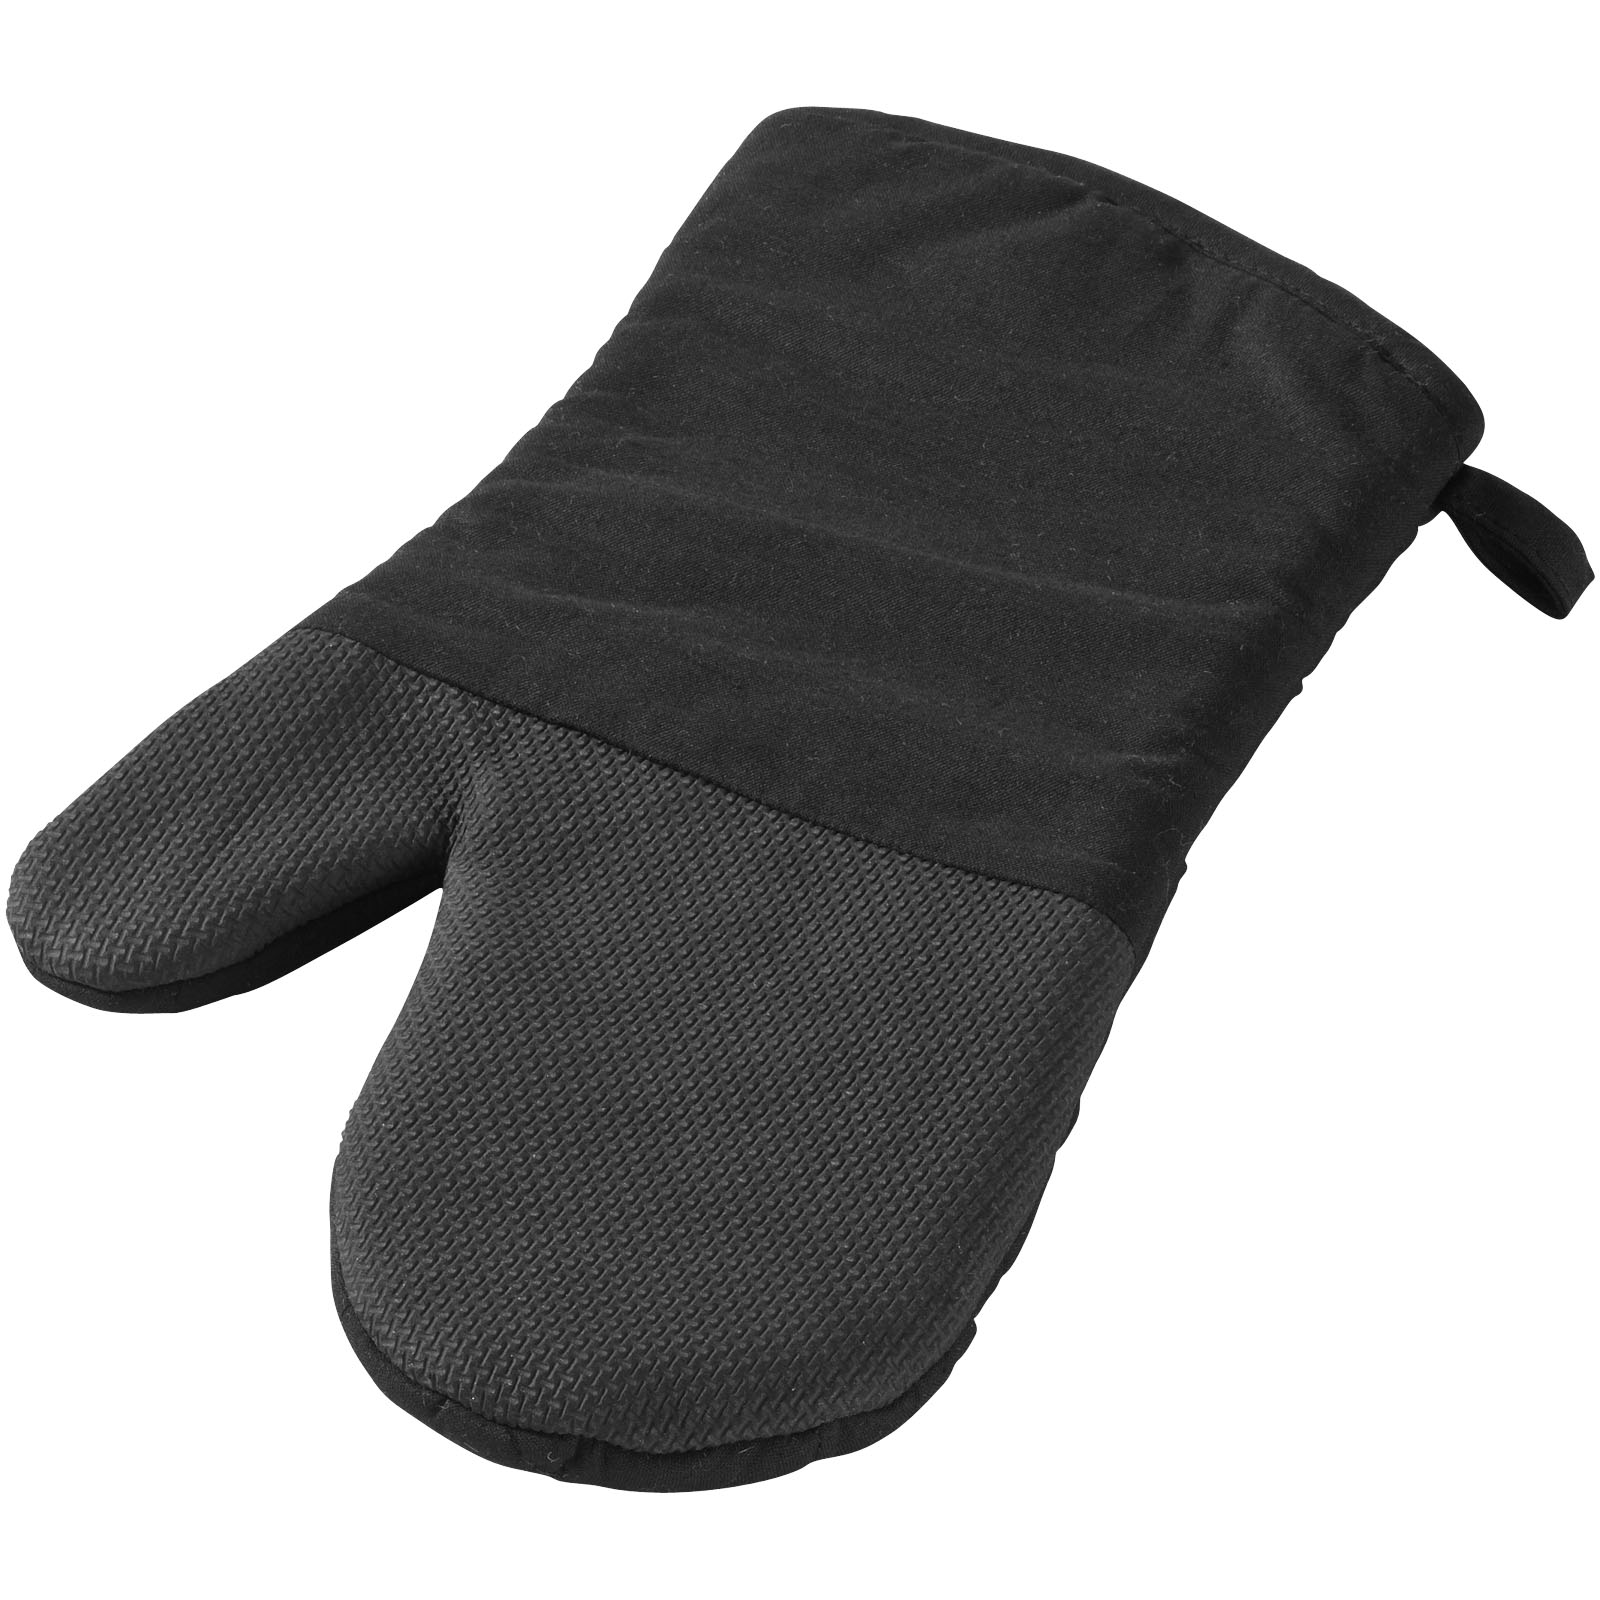 Oven mitt with a diamond pattern and a silicone grip - Loch Ness